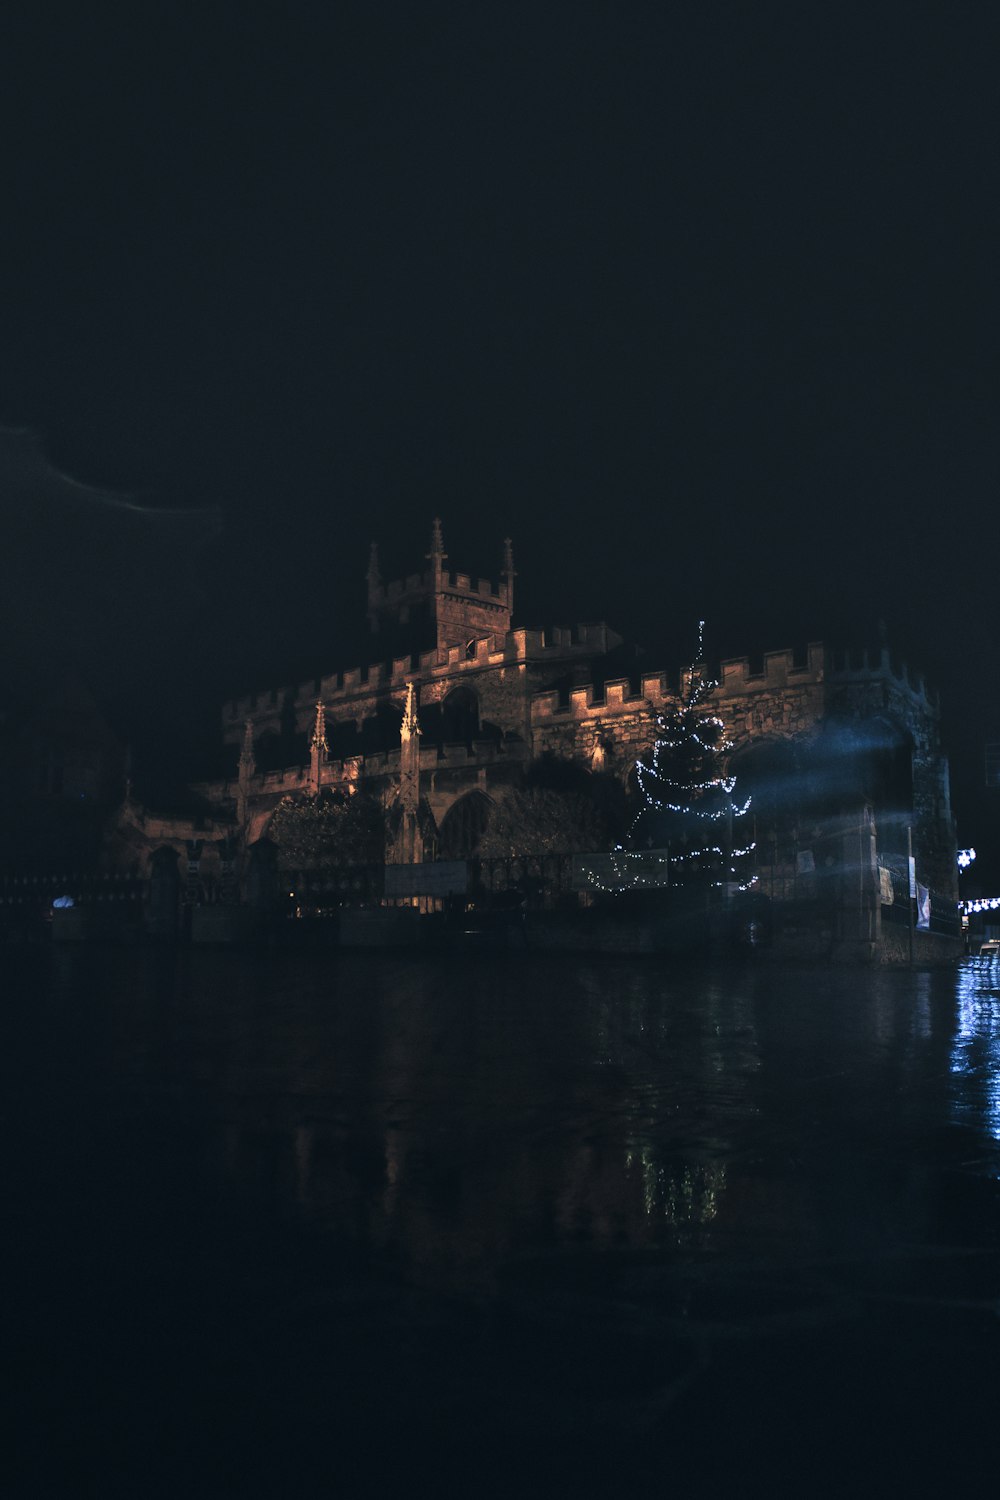 a castle lit up at night with lights reflecting in the water